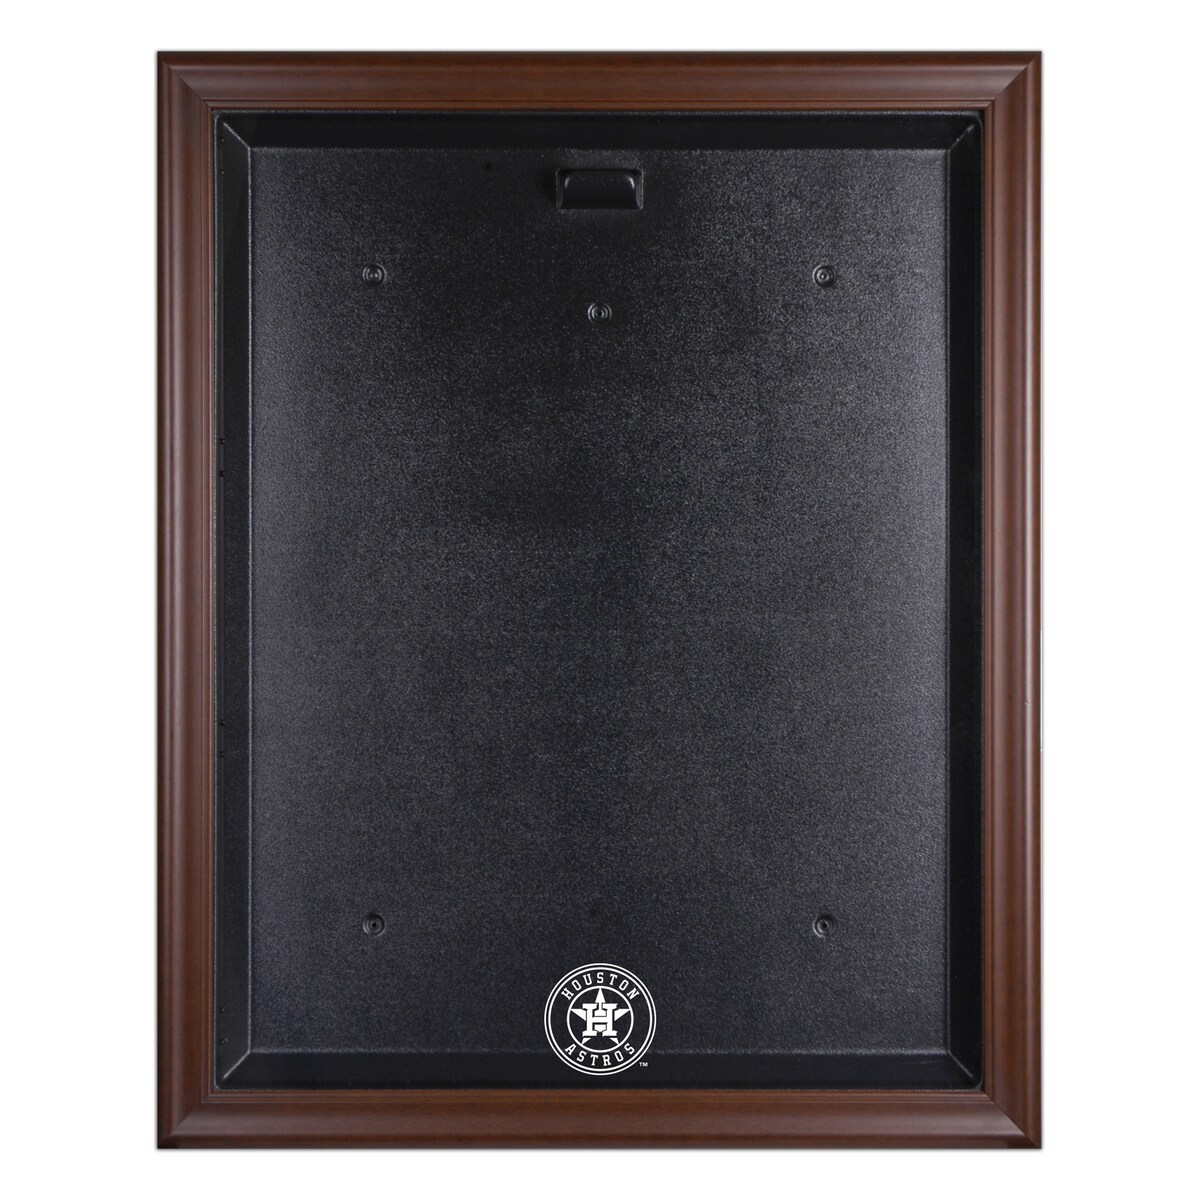 The Houston Astros brown framed logo jersey display case opens on hinges and is easily wall-mounted. It comes with a 24" clear acrylic rod to display a collectible jersey. It comes constructed with a durable, high-strength injection mold backing, encased by a beautiful wood frame and an engraved team logo on the front. Officially licensed by Major League Baseball. The inner dimensions of the case are 38" x 29 1/2"x 3" with the outer measurements of 42" x 34 1/2" x 3 1/2". Memorabilia sold separately.Easily wall mountedHas a LogoEngraved team graphicsOfficially licensed MLB productWood frameMade in the U.S.A.Hinges to open easilyMemorabilia sold separatelyIncludes acrylic rod to hold jerseyCollectible jersey display caseImportedBrand: Fanatics AuthenticOfficially licensed